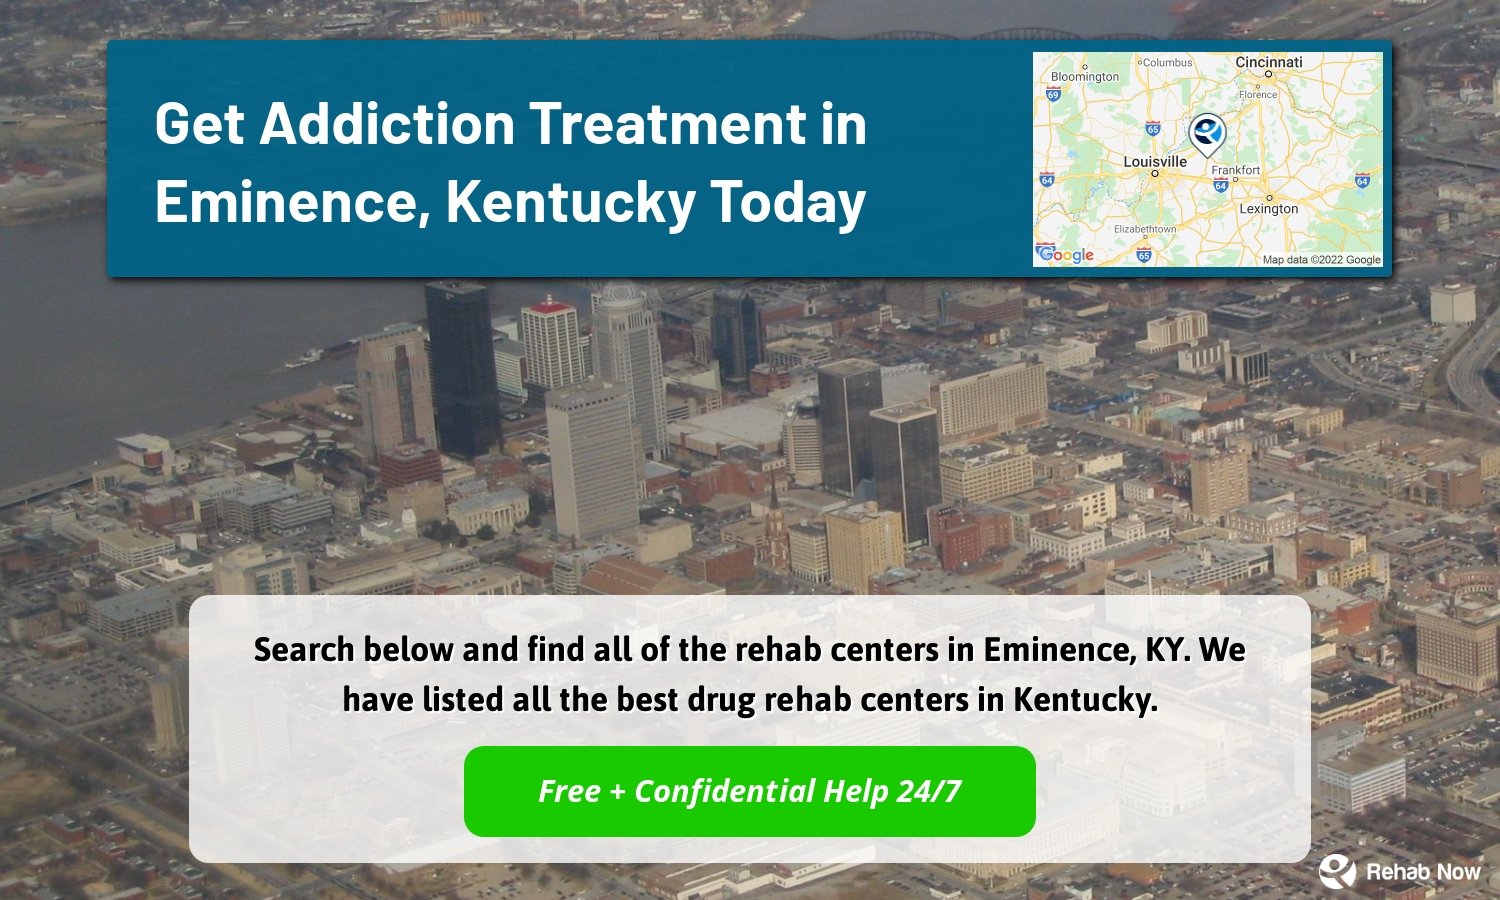 Search below and find all of the rehab centers in Eminence, KY. We have listed all the best drug rehab centers in Kentucky.